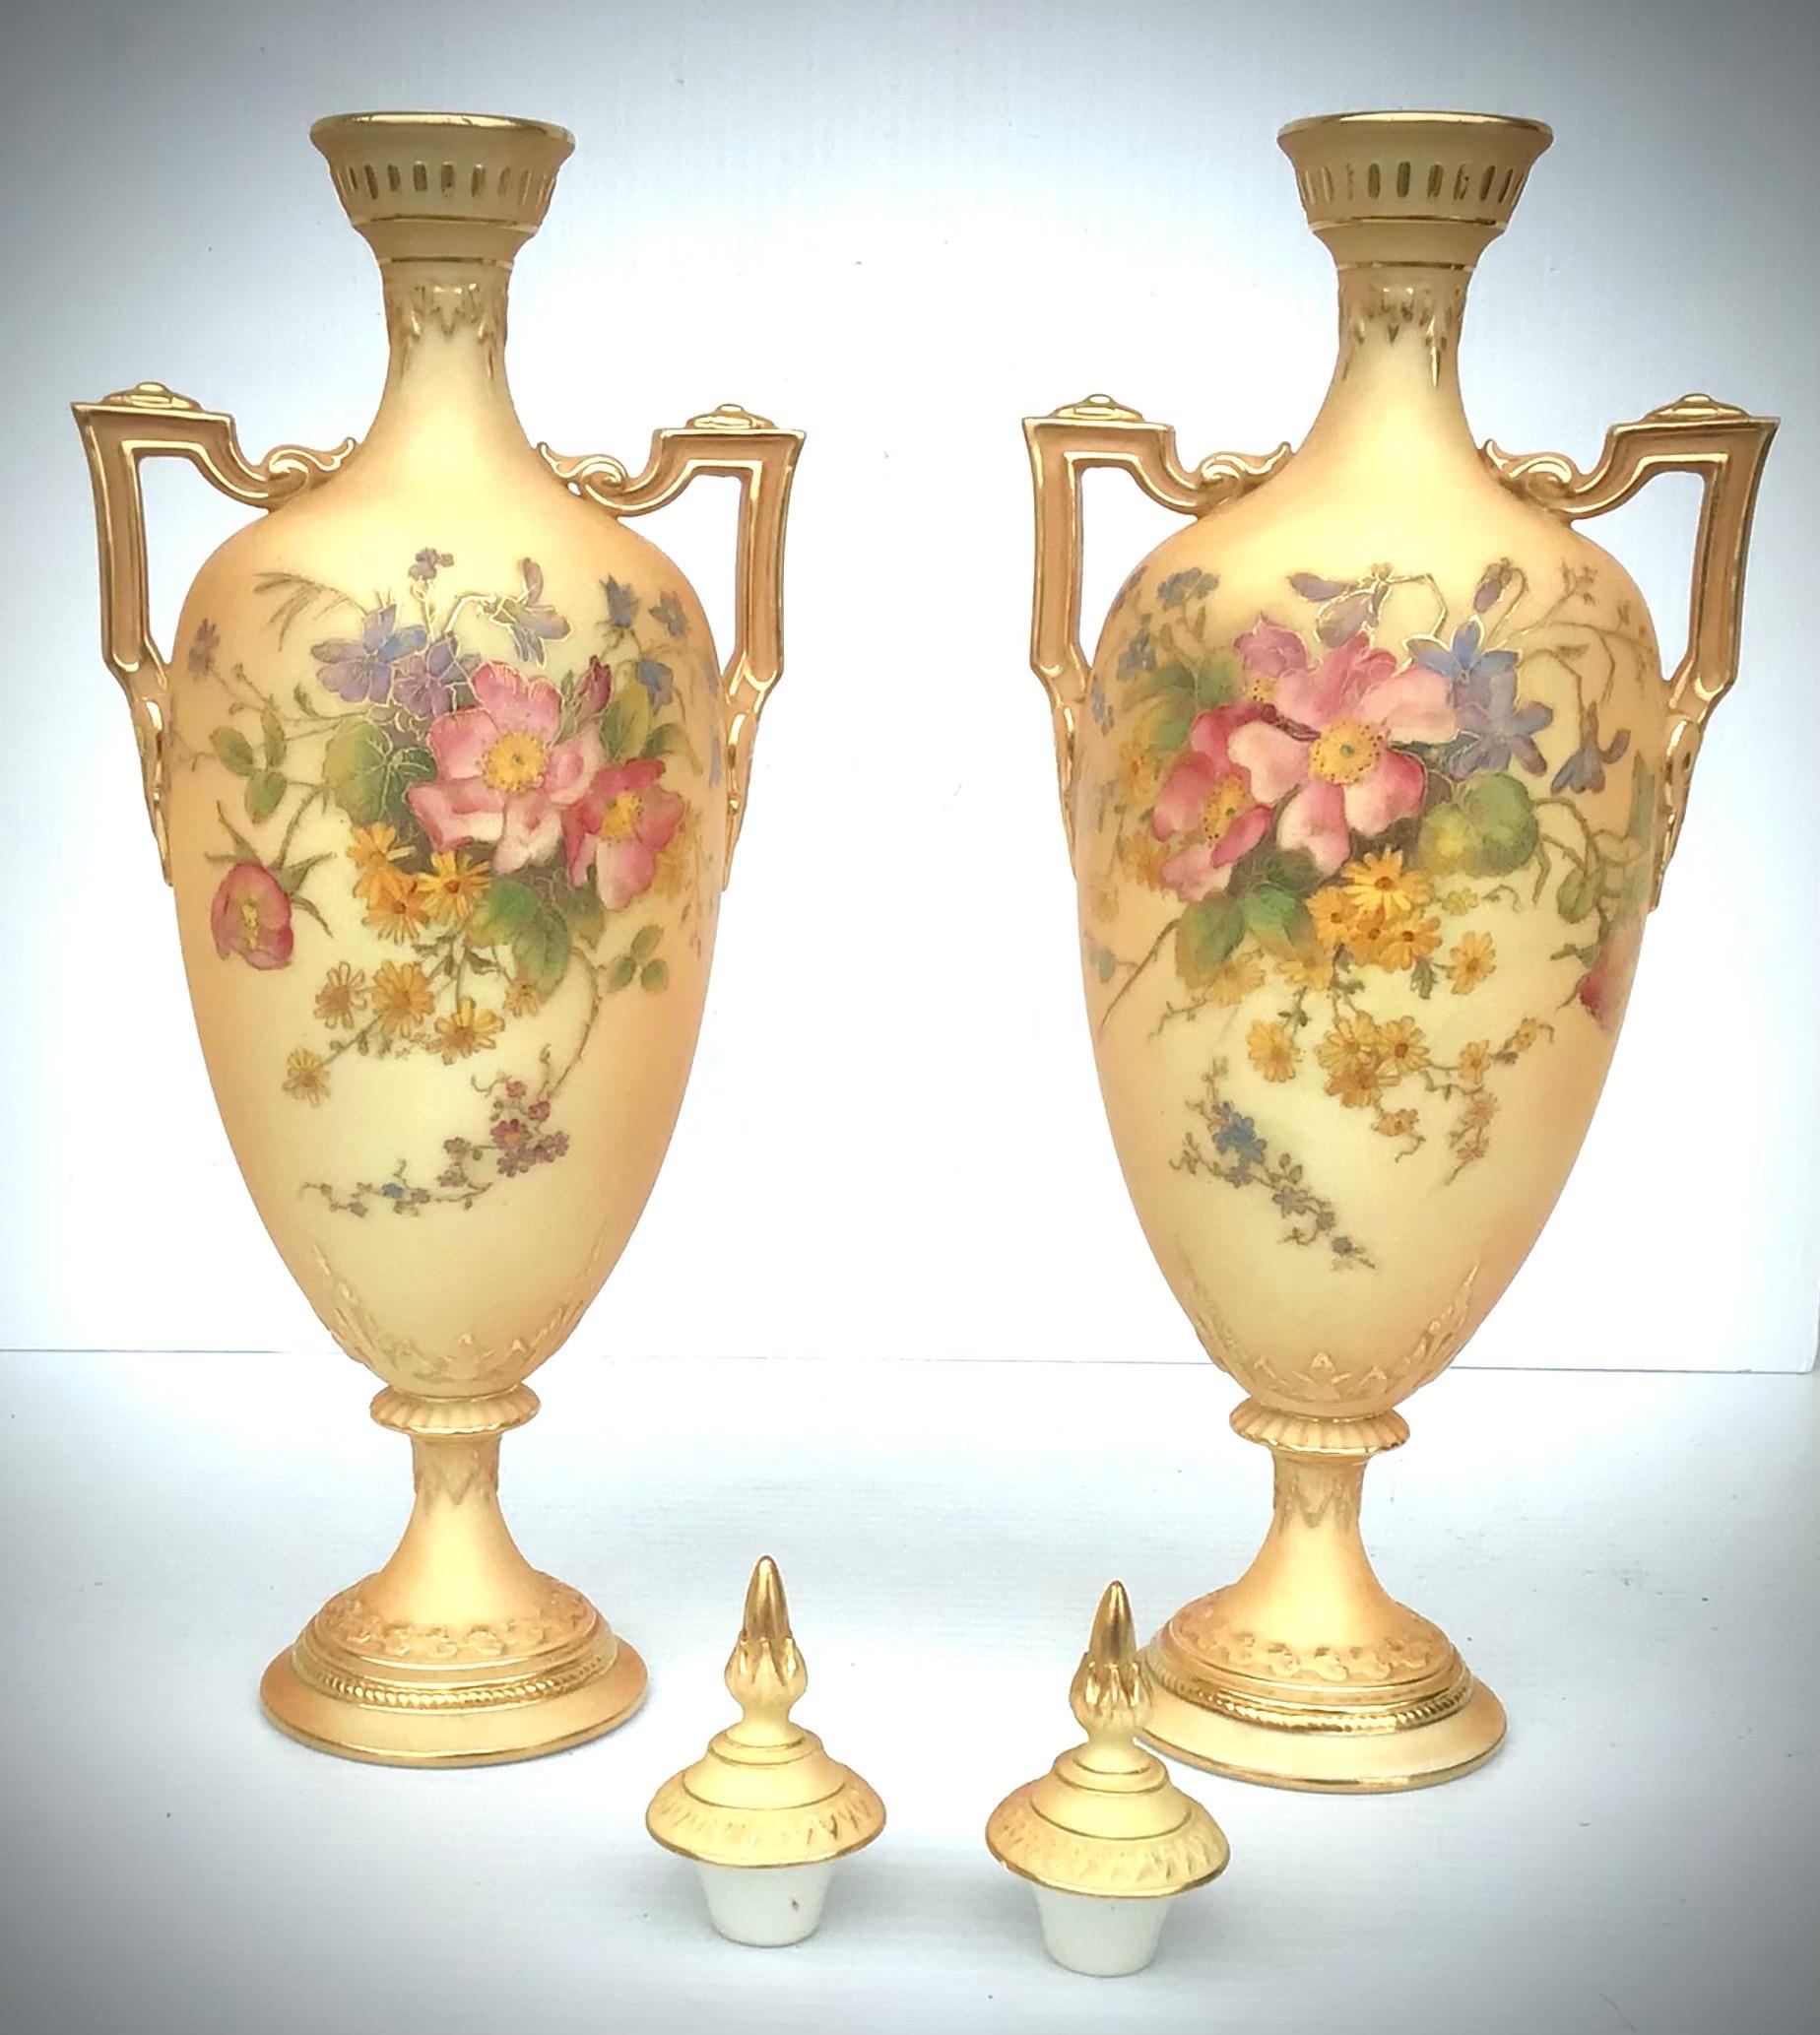 Superb pair of Royal Worcester blush ivory vases, complete with covers.
Hand painted with flowers and foliage.
Circa 1912(Green and puce marks)
12 ins tall x 4.5 ins wide x 3.5 ins deep.
Excellent original condition.